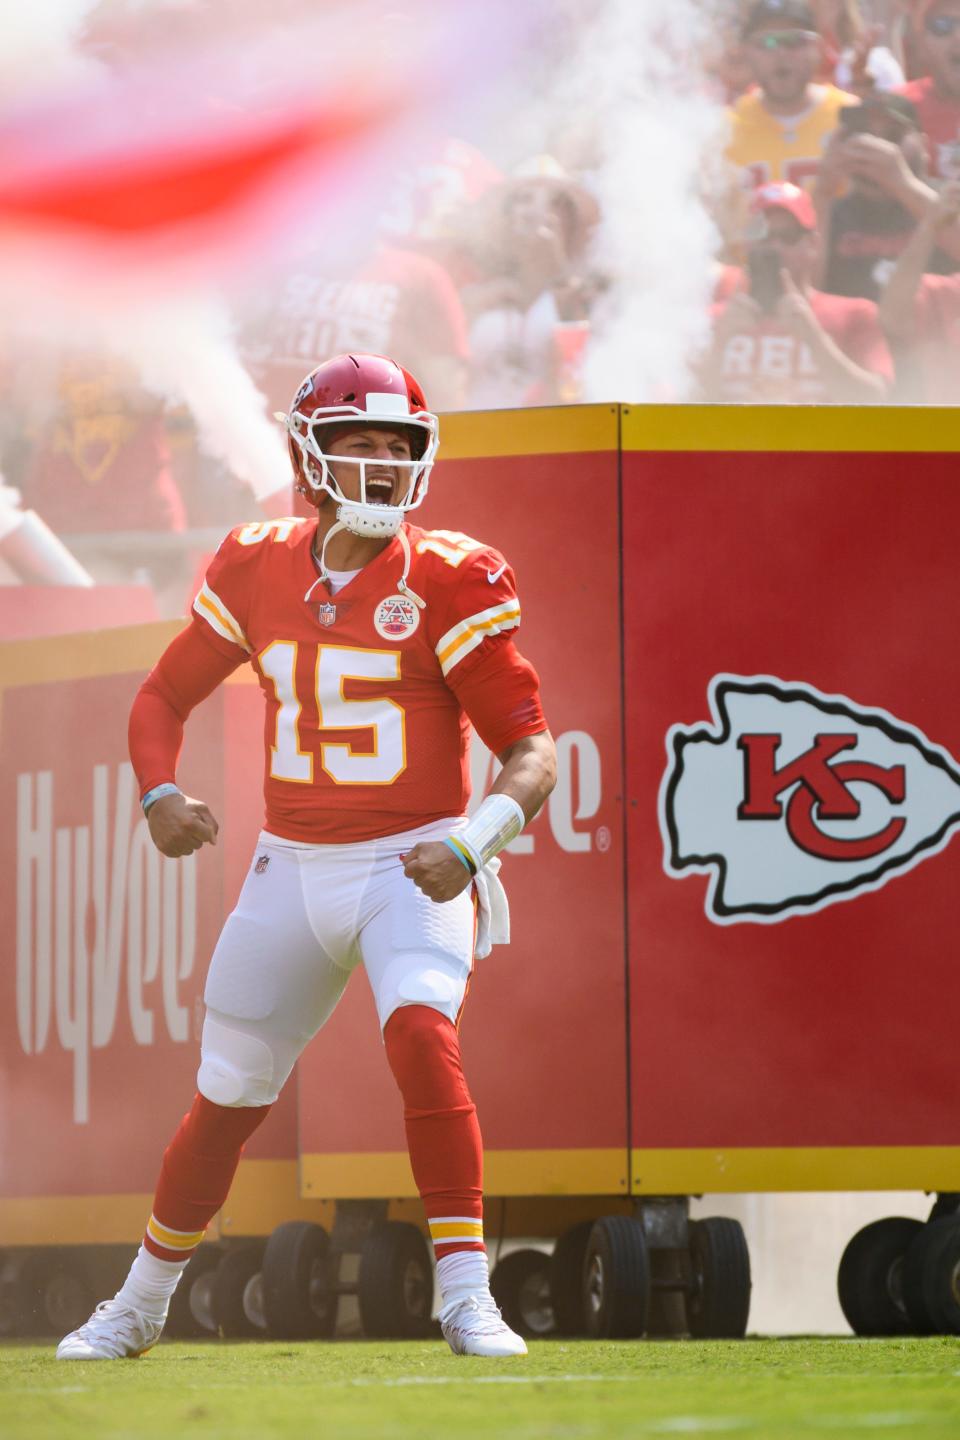 Kansas City Chiefs quarterback Patrick Mahomes during introductions before the first half against the Browns on Sept.12, 2021, in Kansas City, Mo.